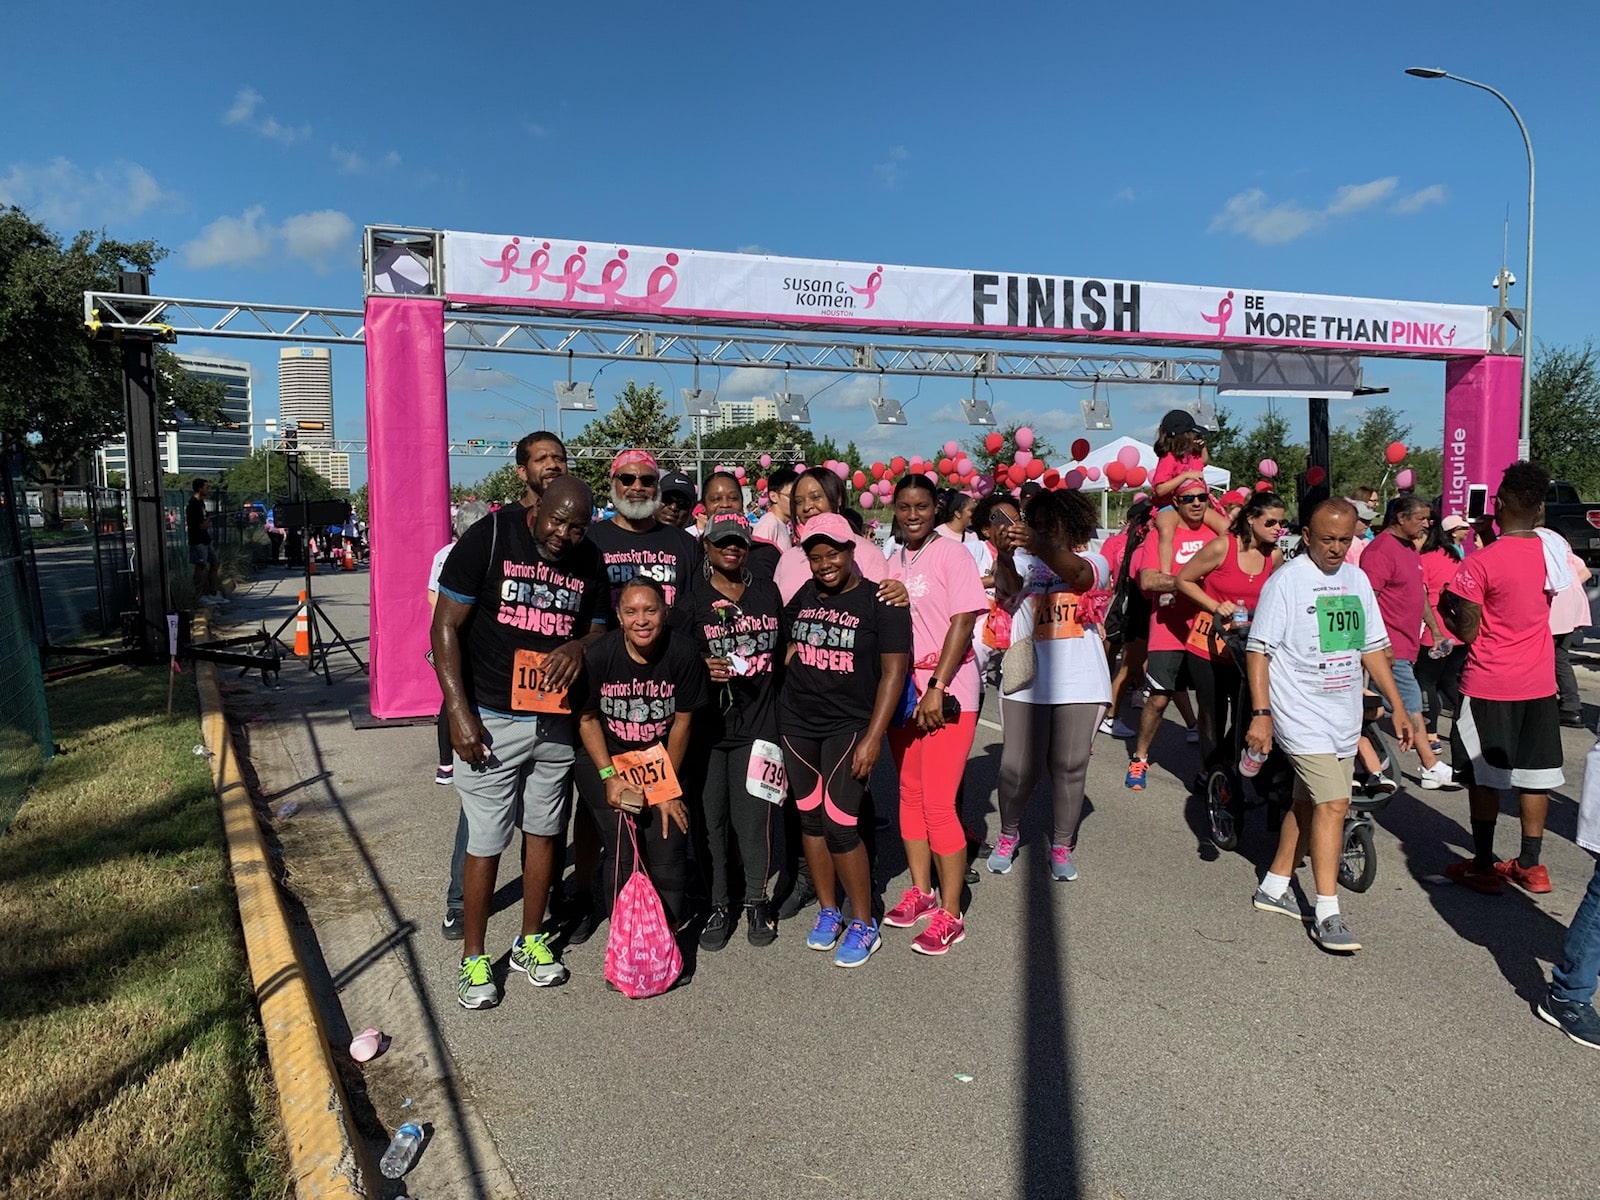 Carla Square celebrating another completed race to raise awareness and research dollars for breast cancer.